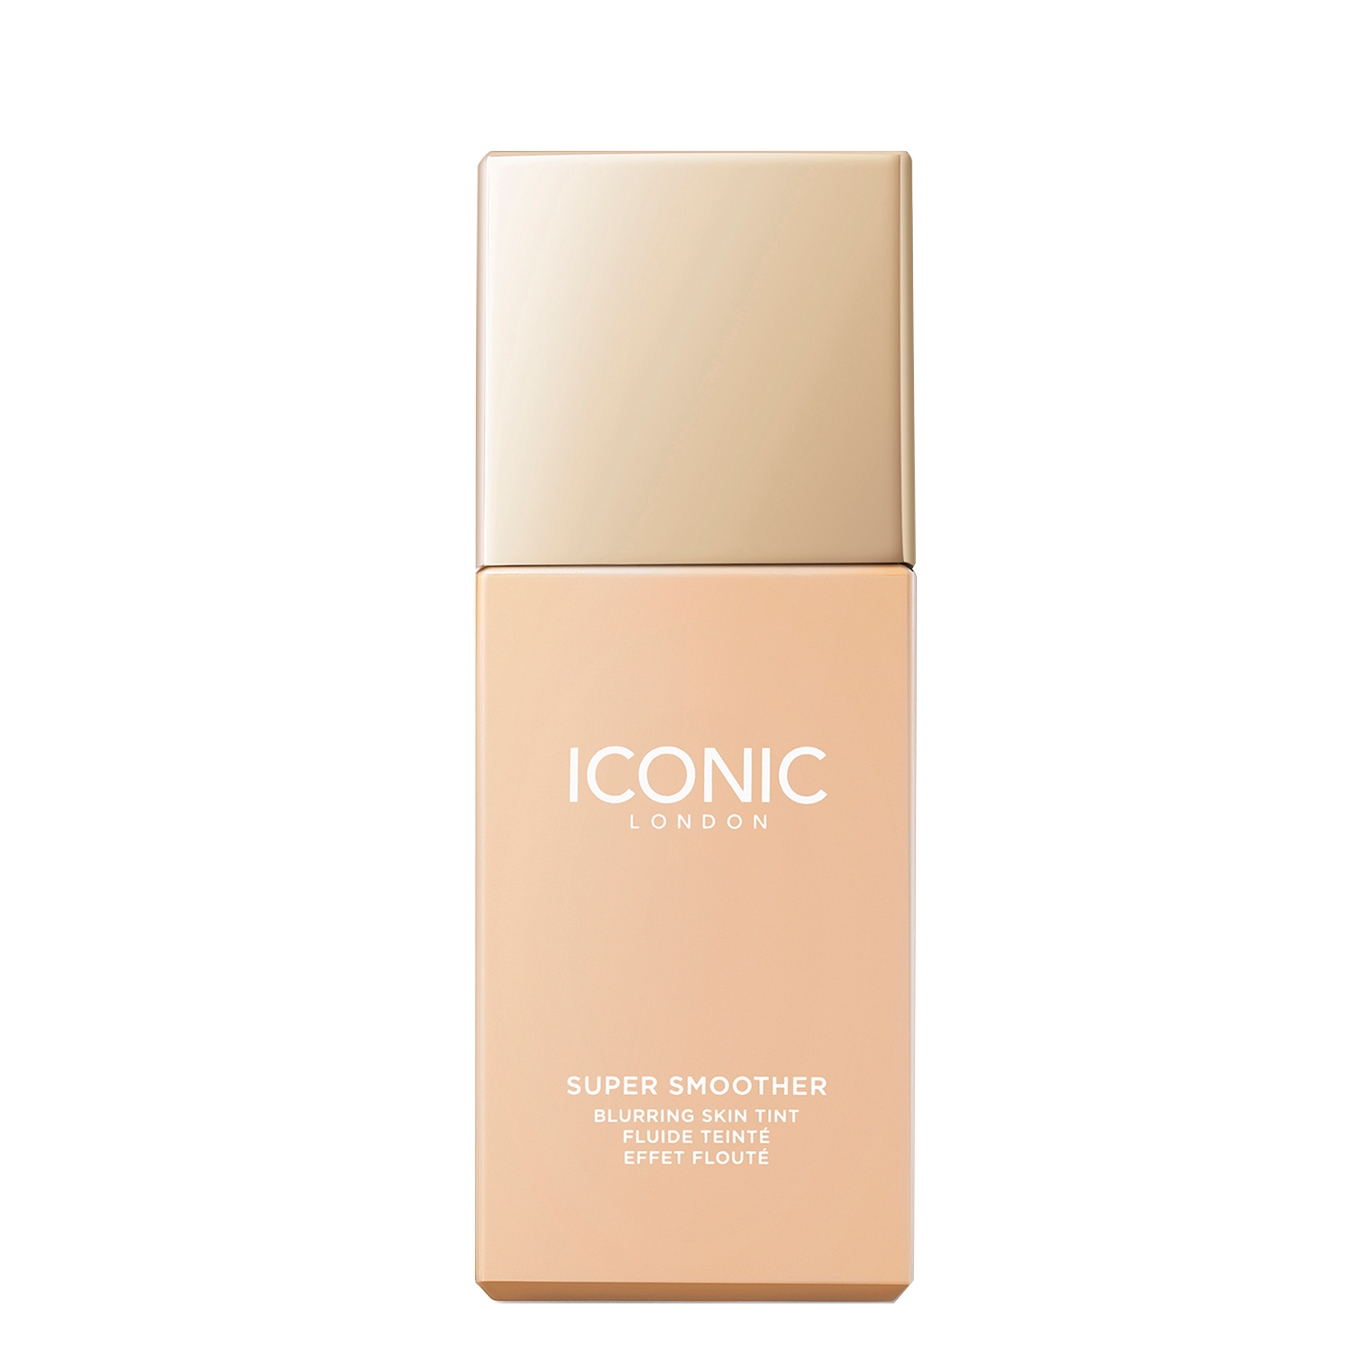 Iconic London Super Smoother Blurring Skin Tint - Colour Warm Fair